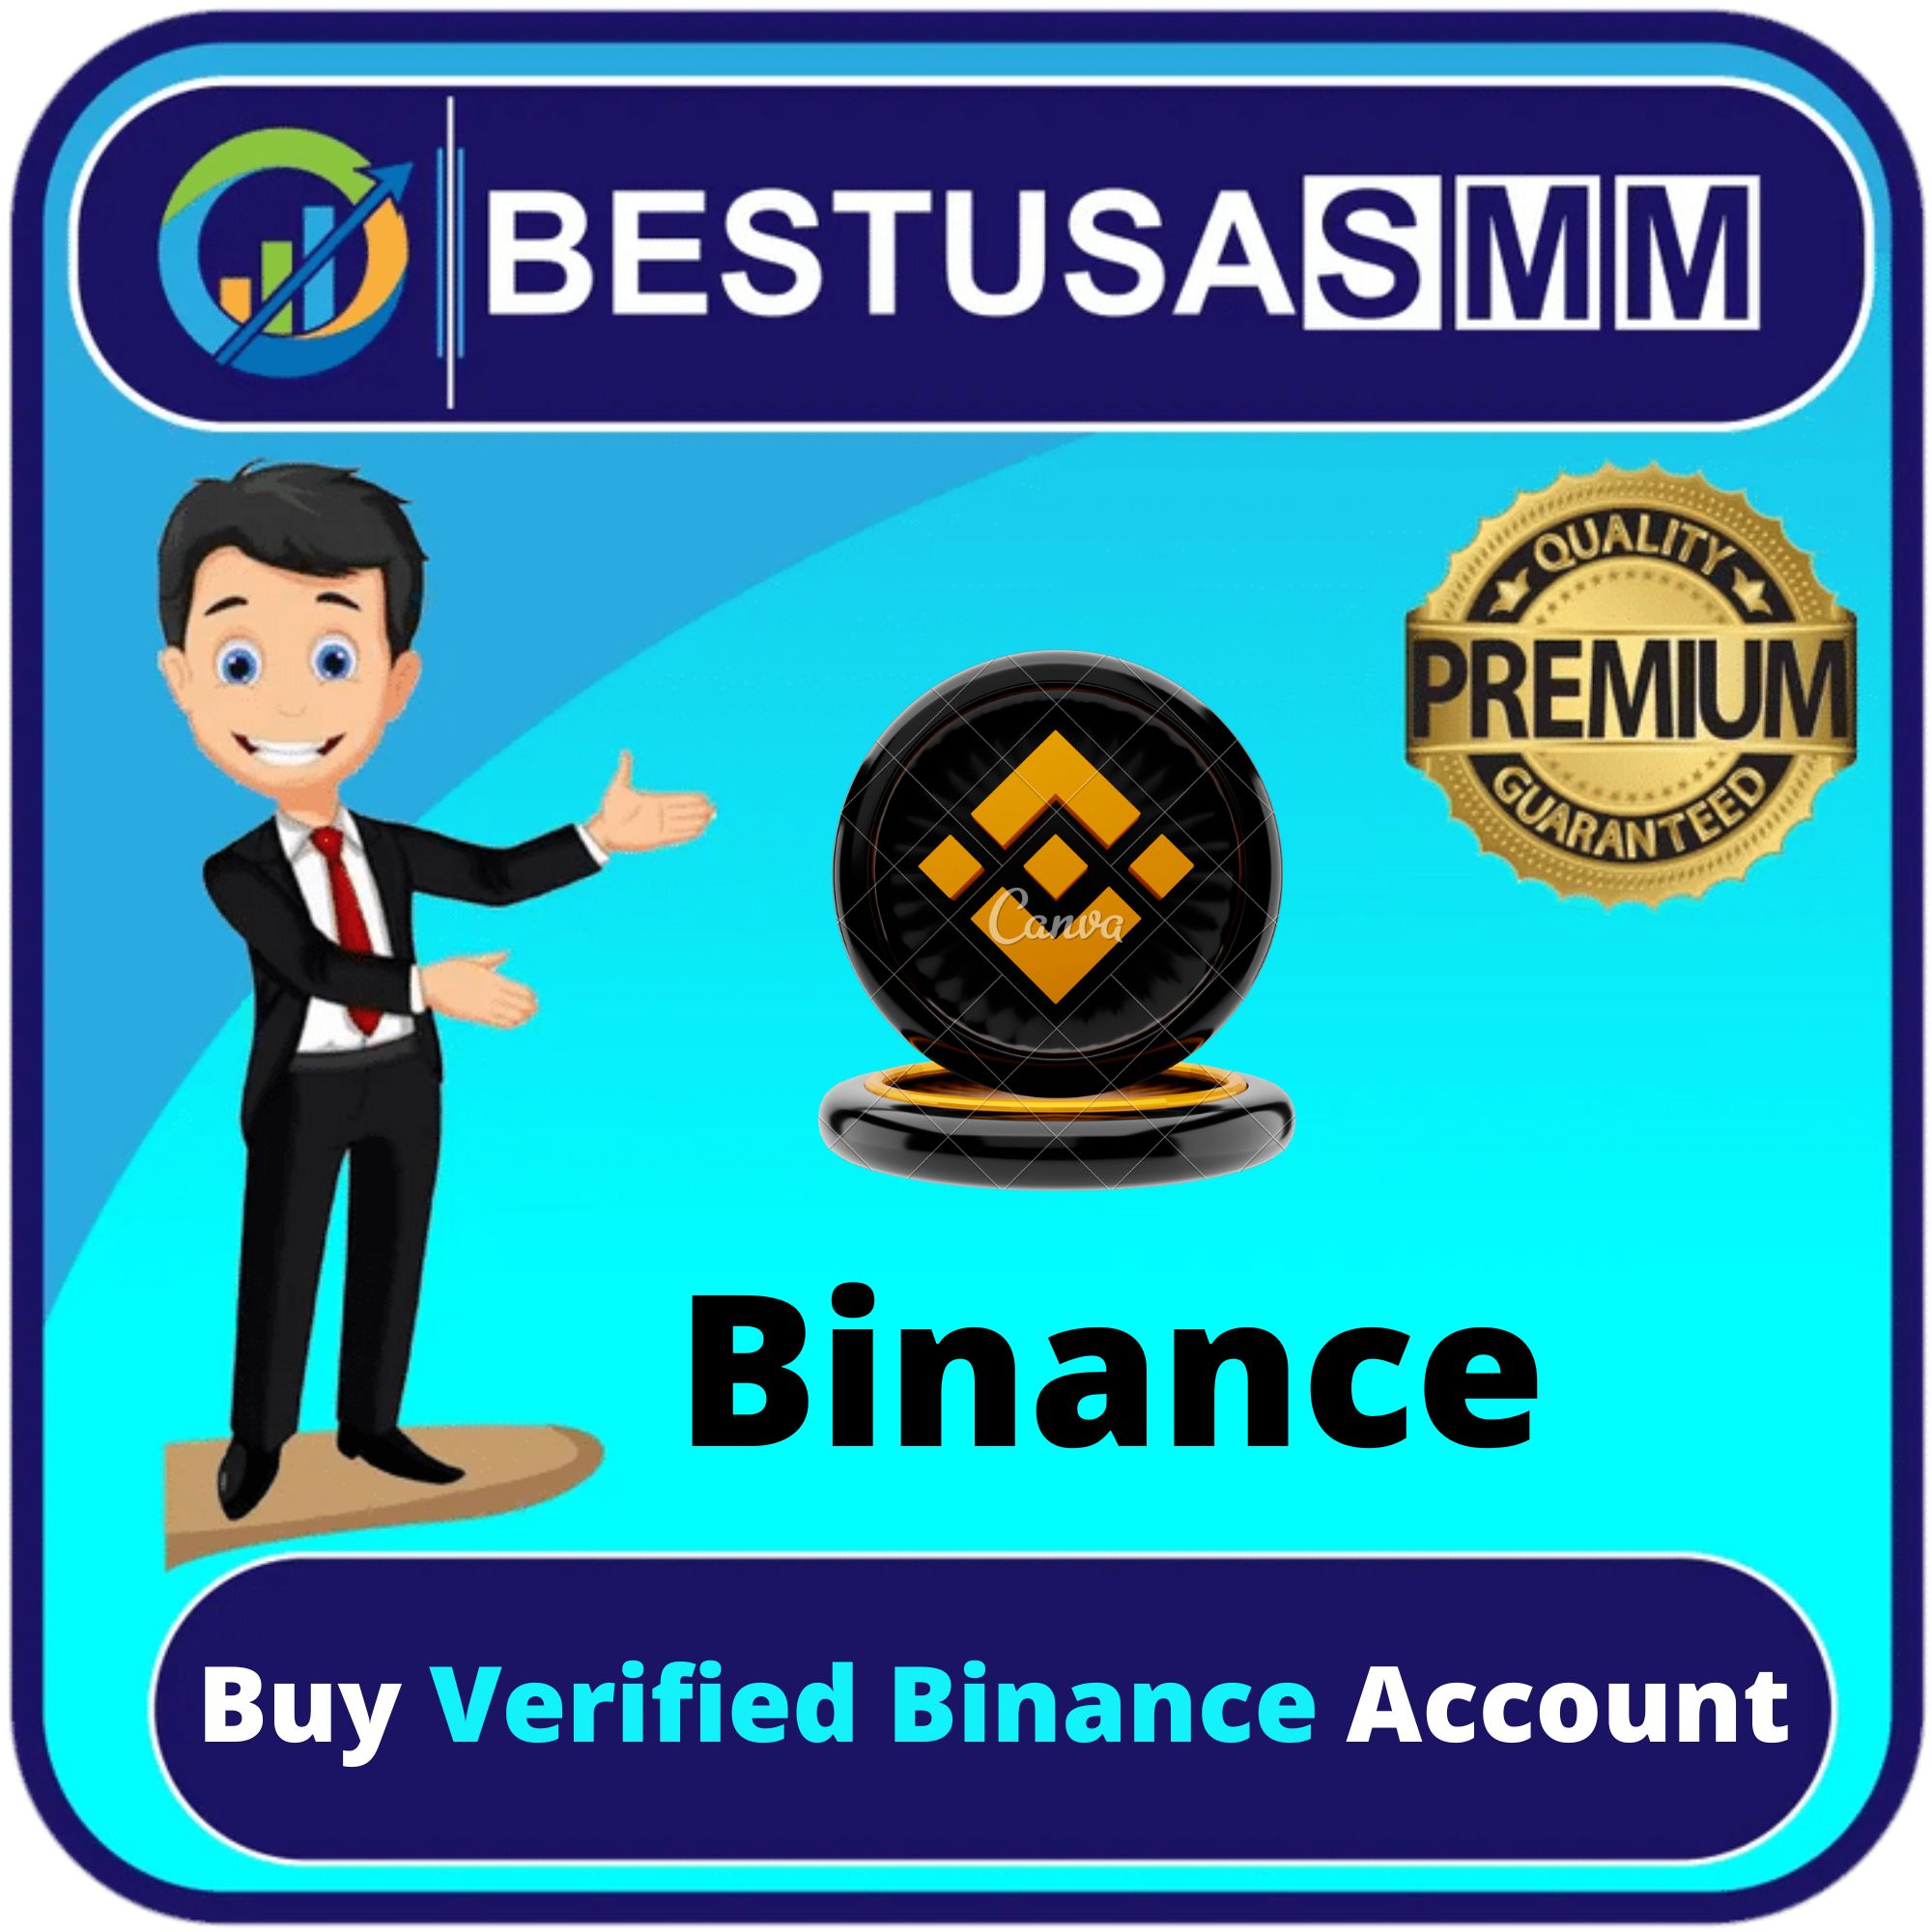 Buy Verified Binance Accounts - With Documents for sale 2022